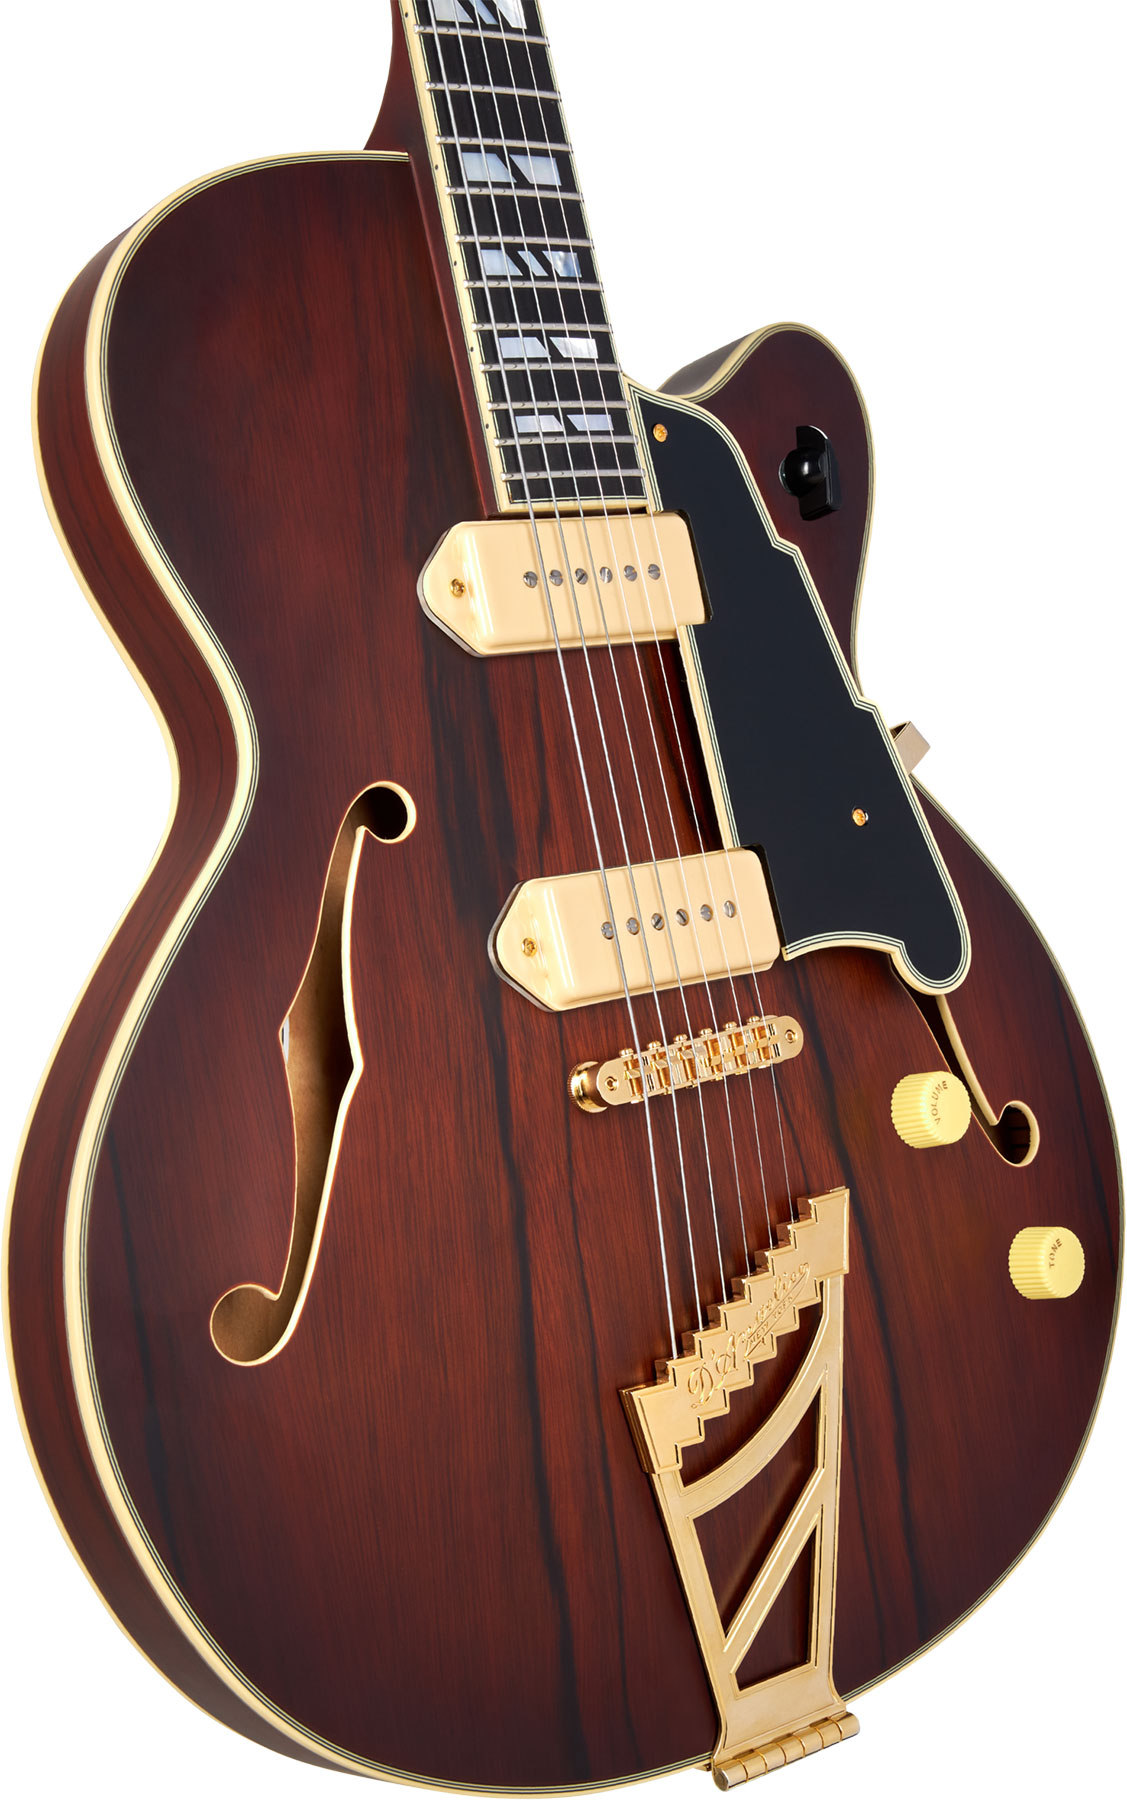 D'angelico 59 Deluxe 2s P90 Ht Eb - Satin Brown Burst - Hollow-body electric guitar - Variation 3